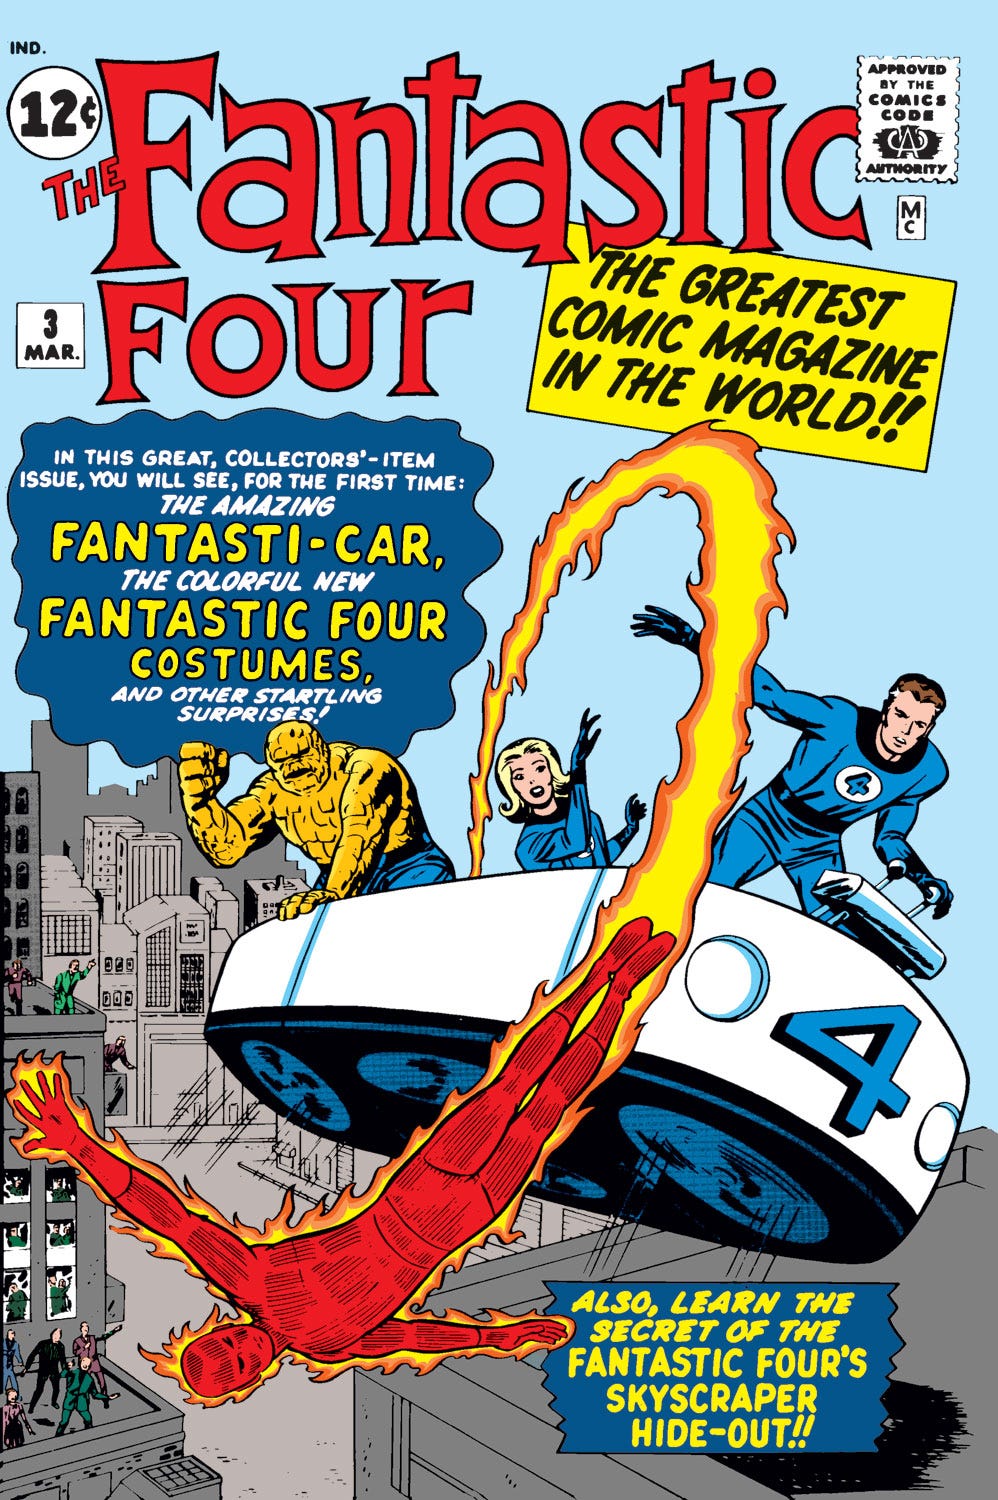 Episode 8: The Torch is missing - and new uniforms! (Fantastic Four #3, part 2) -- April 1962